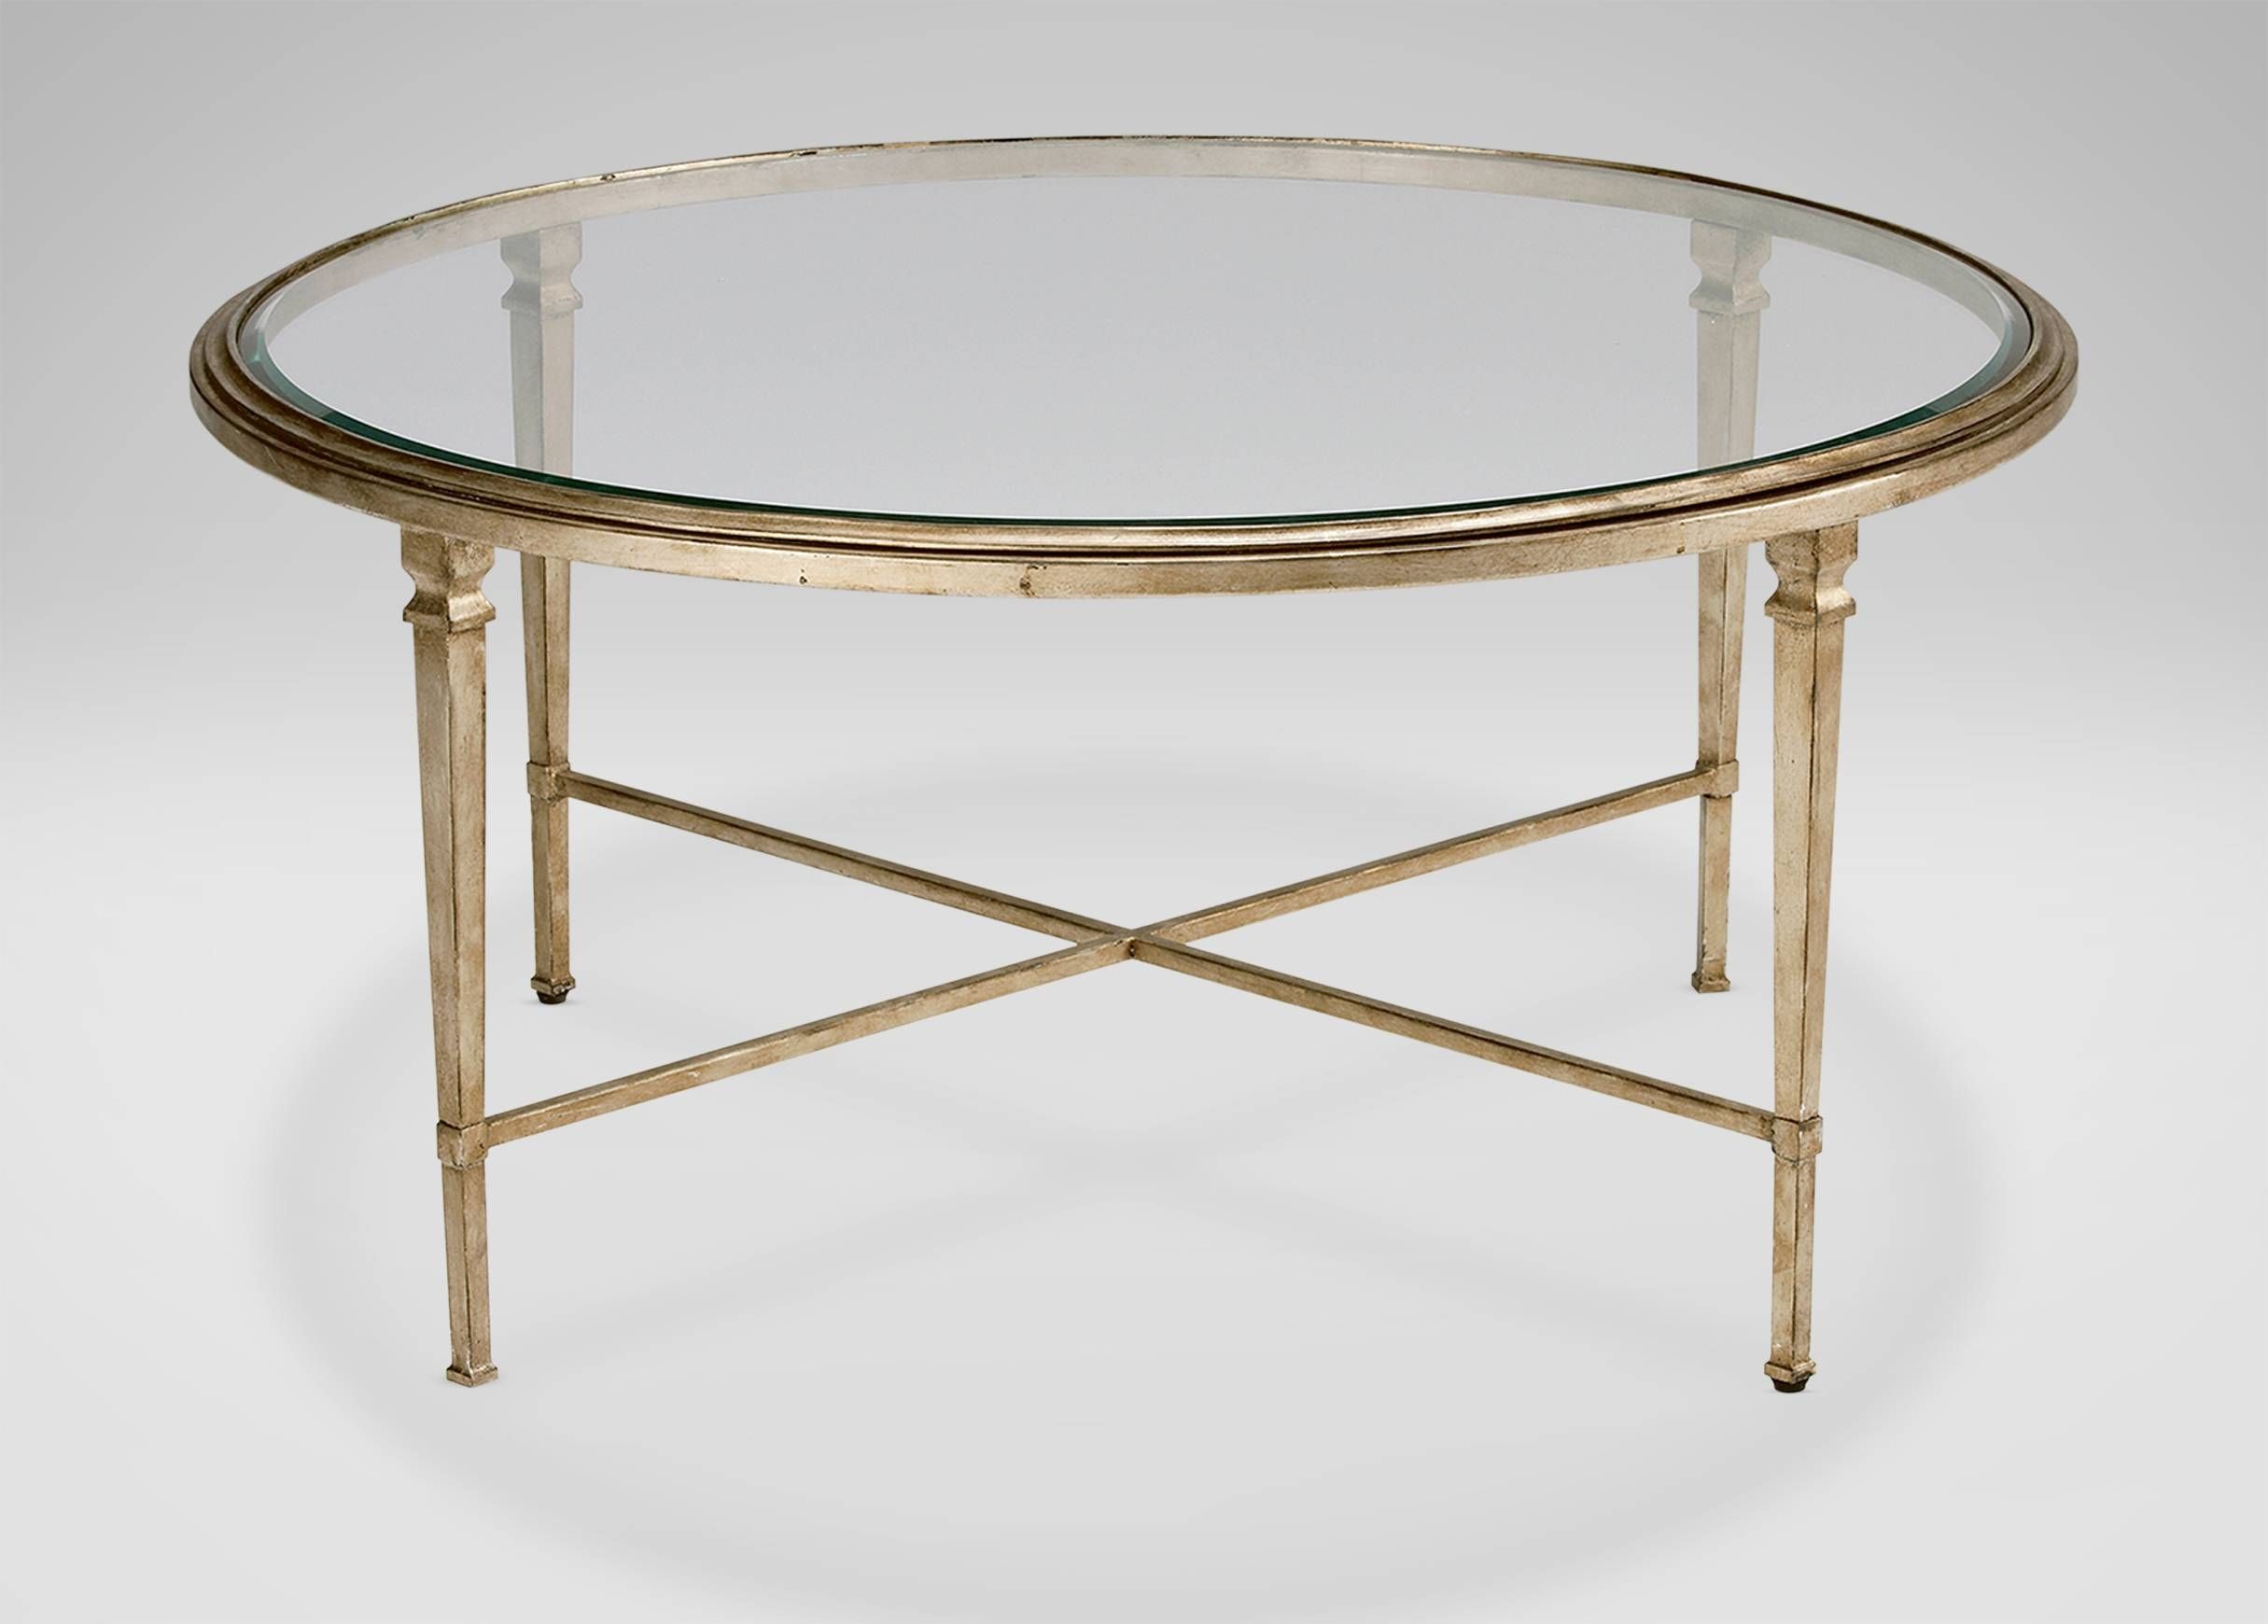 Heron Round Coffee Table | Coffee Tables With Regard To Glass Circle Coffee Tables (View 7 of 30)